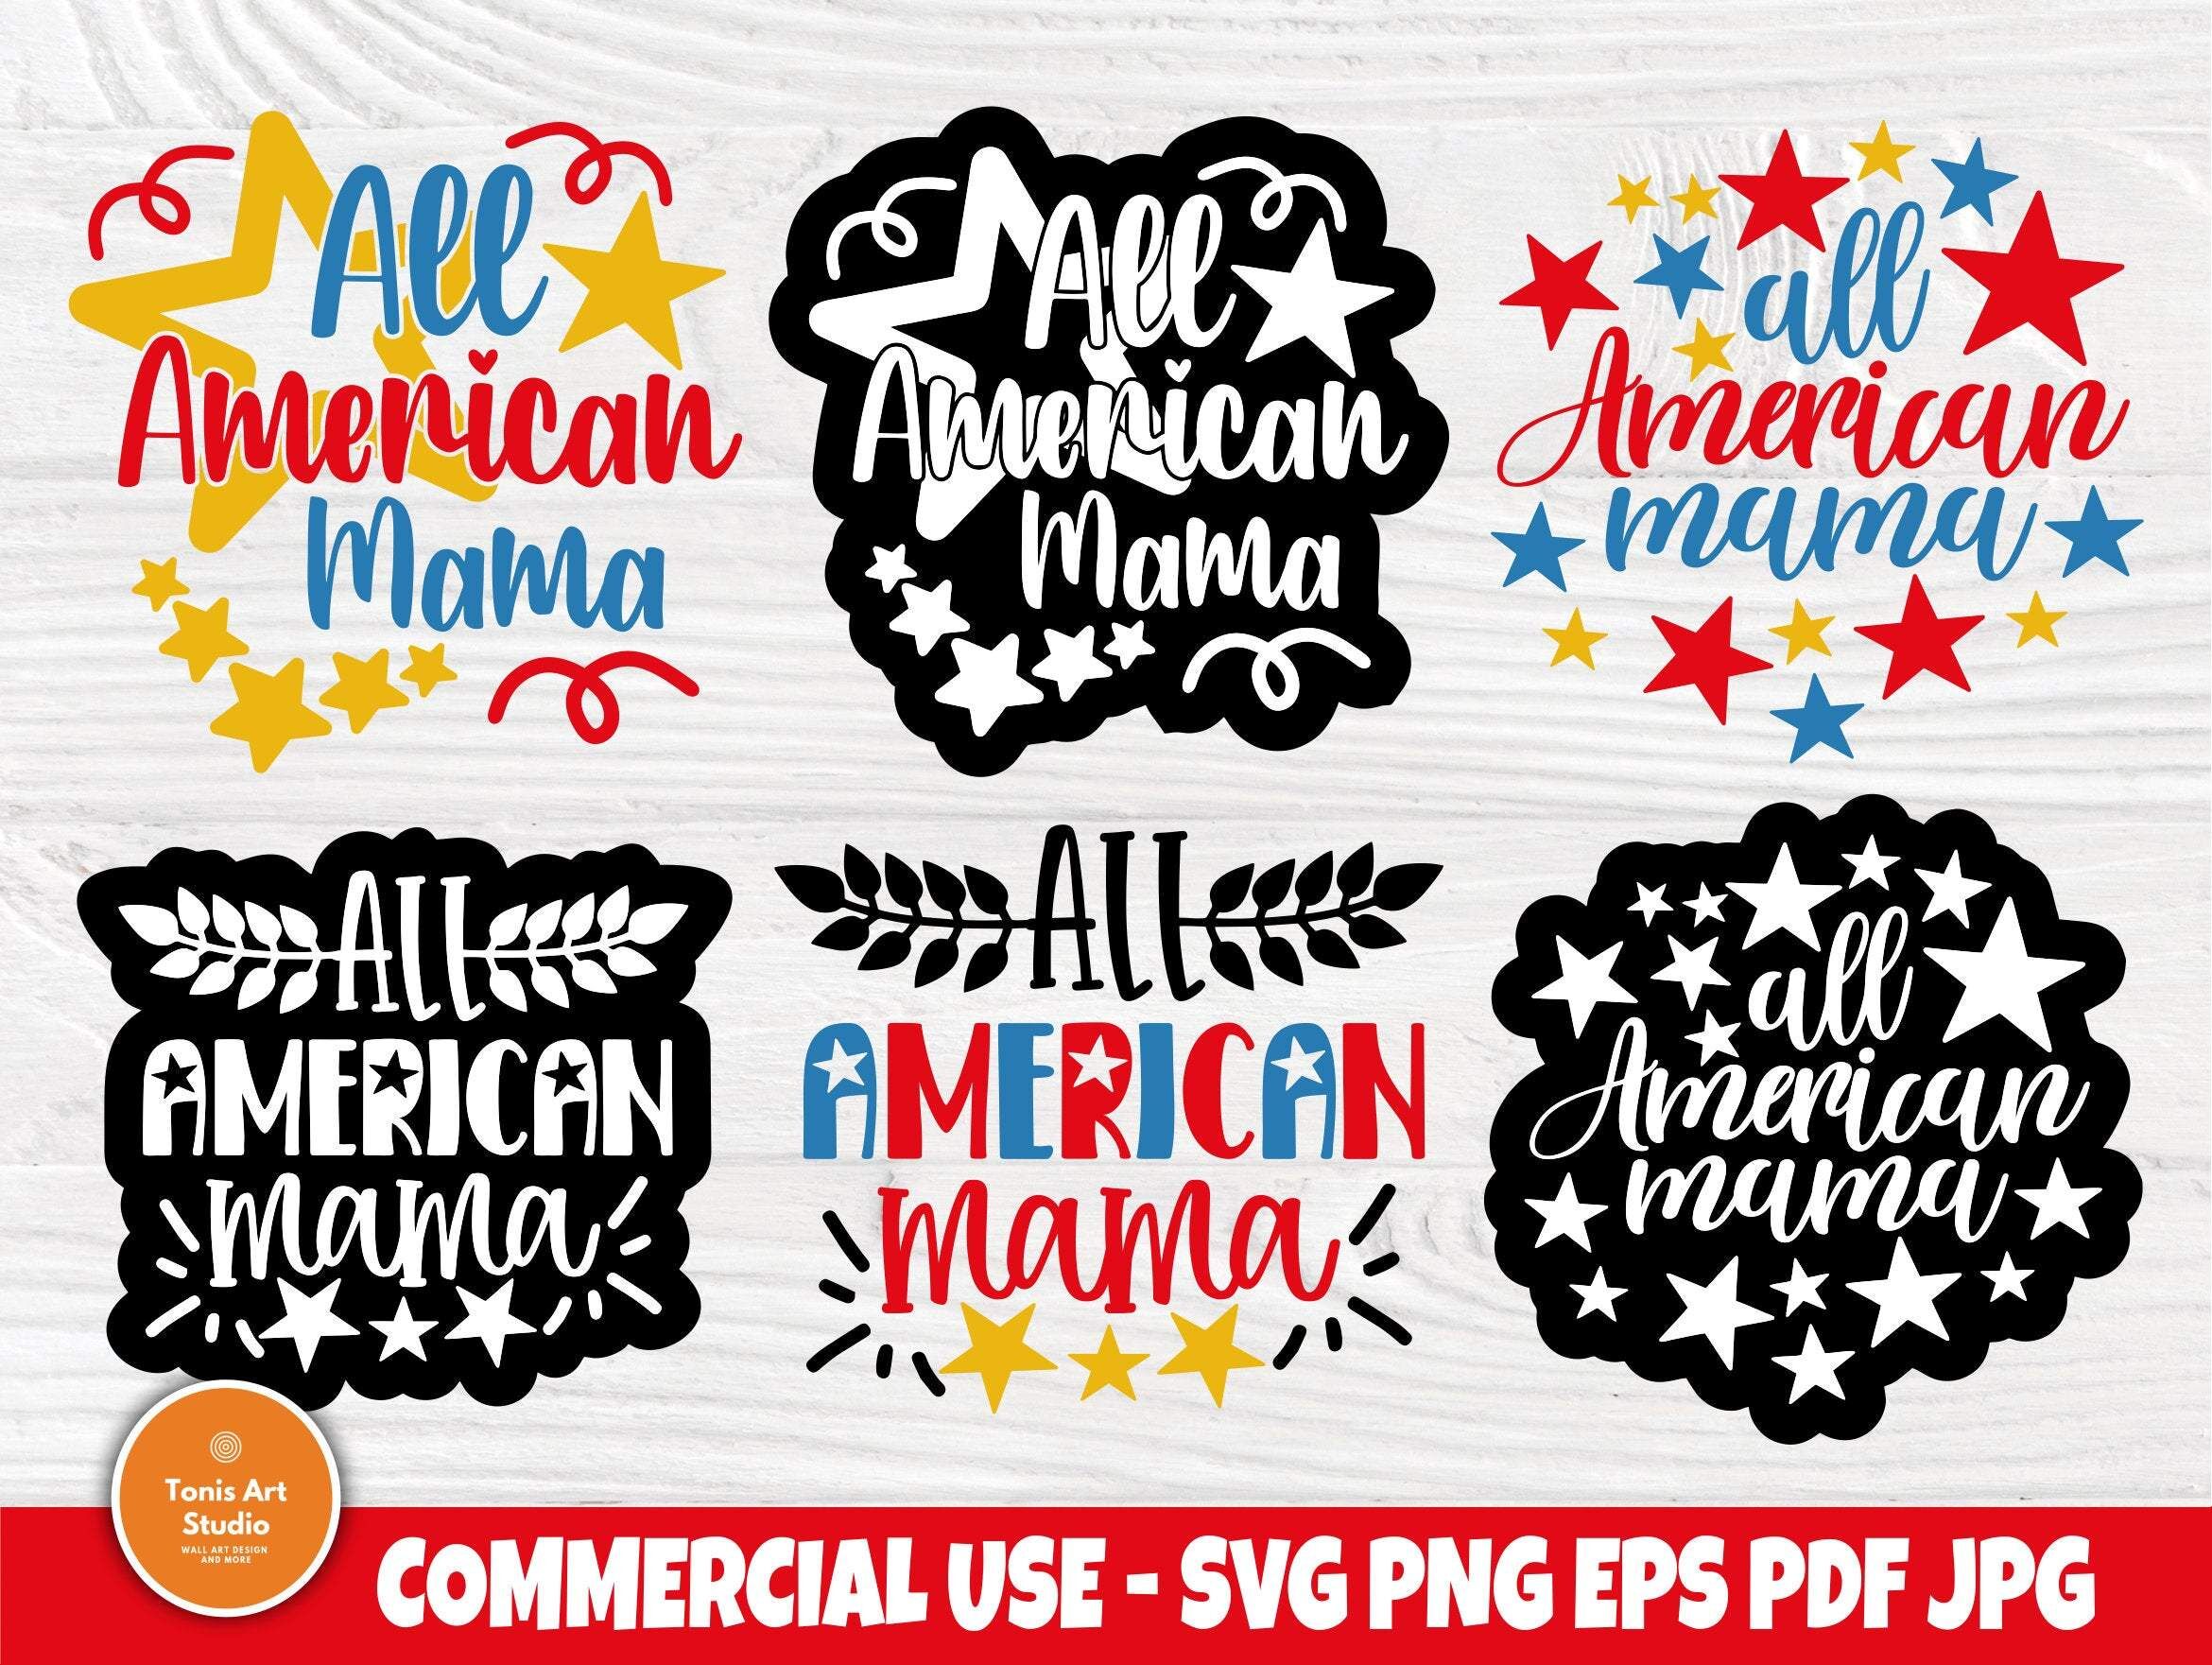 All American Mama SVG Cut File Mom Life Sublimation T-shirt Design Patriotic Mom All American Family